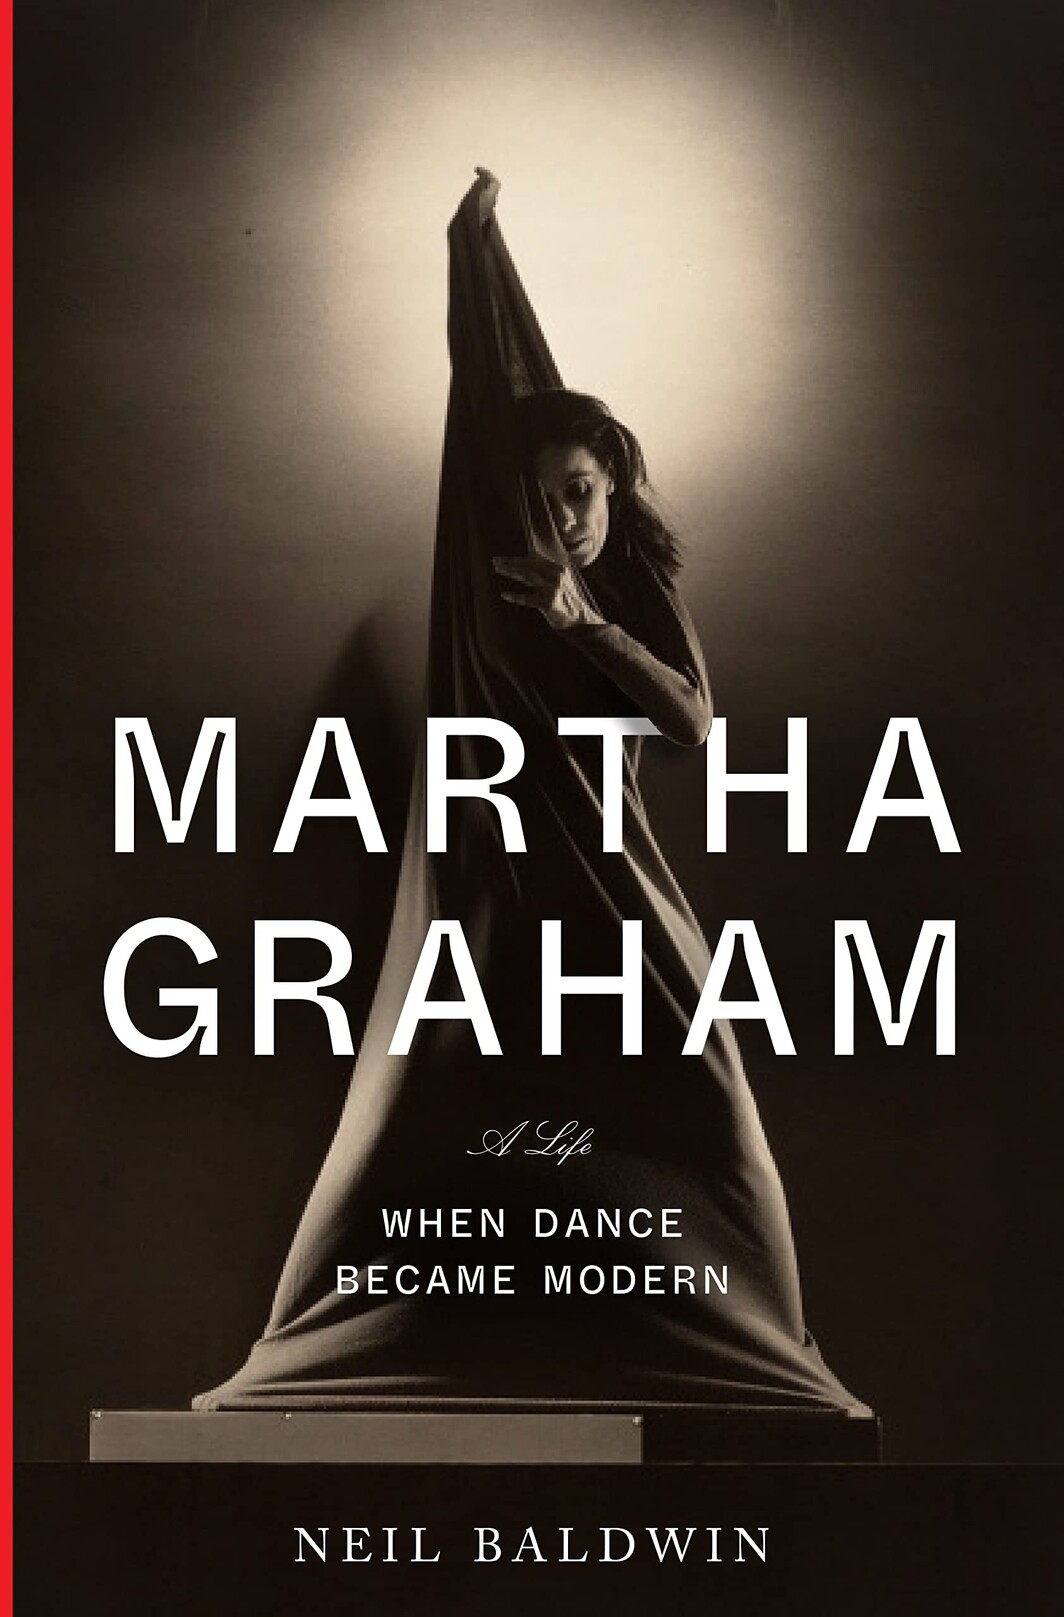 The cover of Martha Graham: When Dance Became Modern